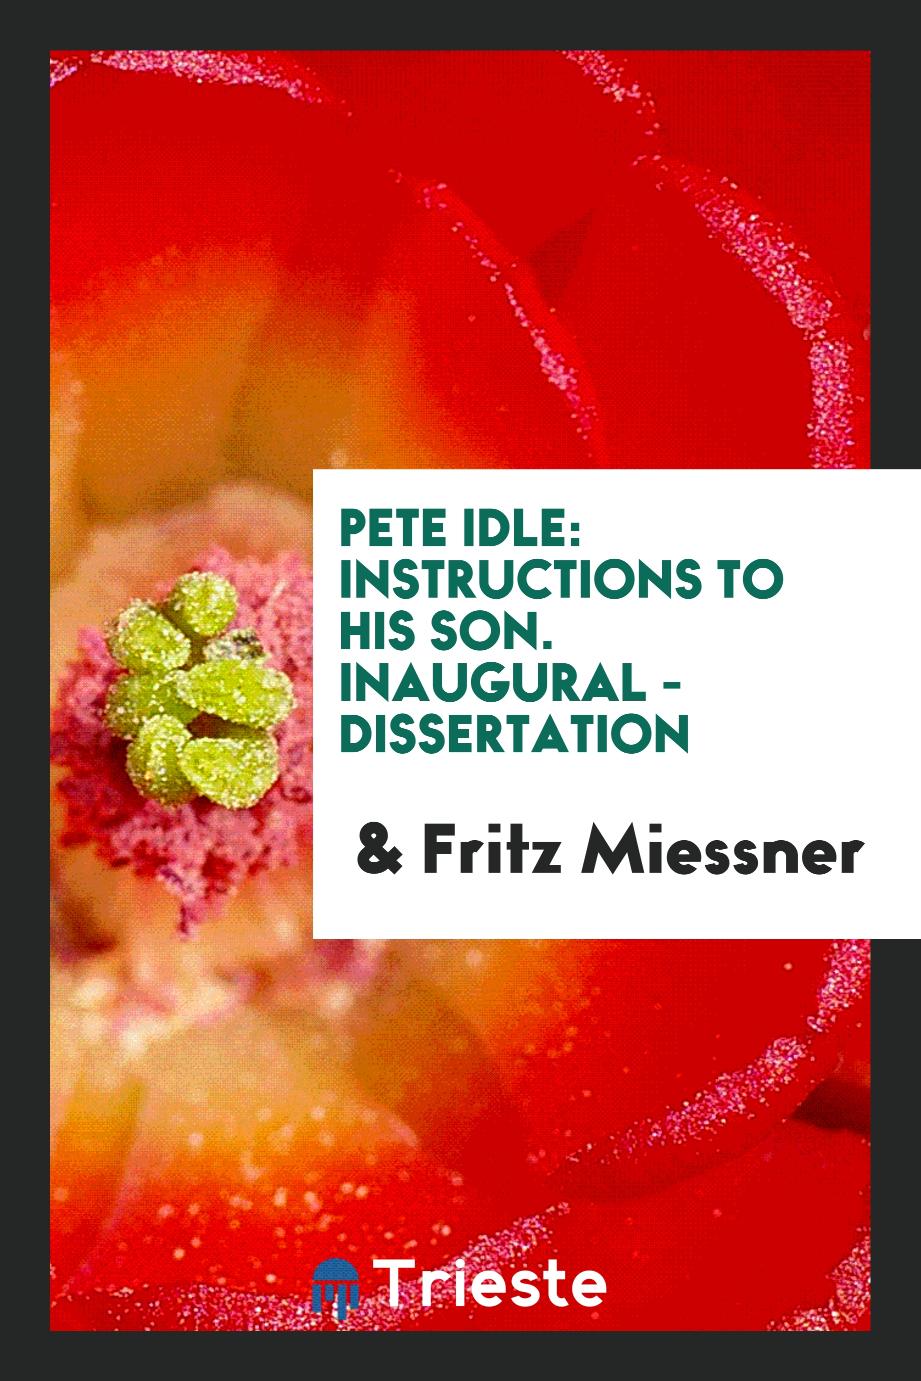 Pete Idle: Instructions to his son. Inaugural - Dissertation